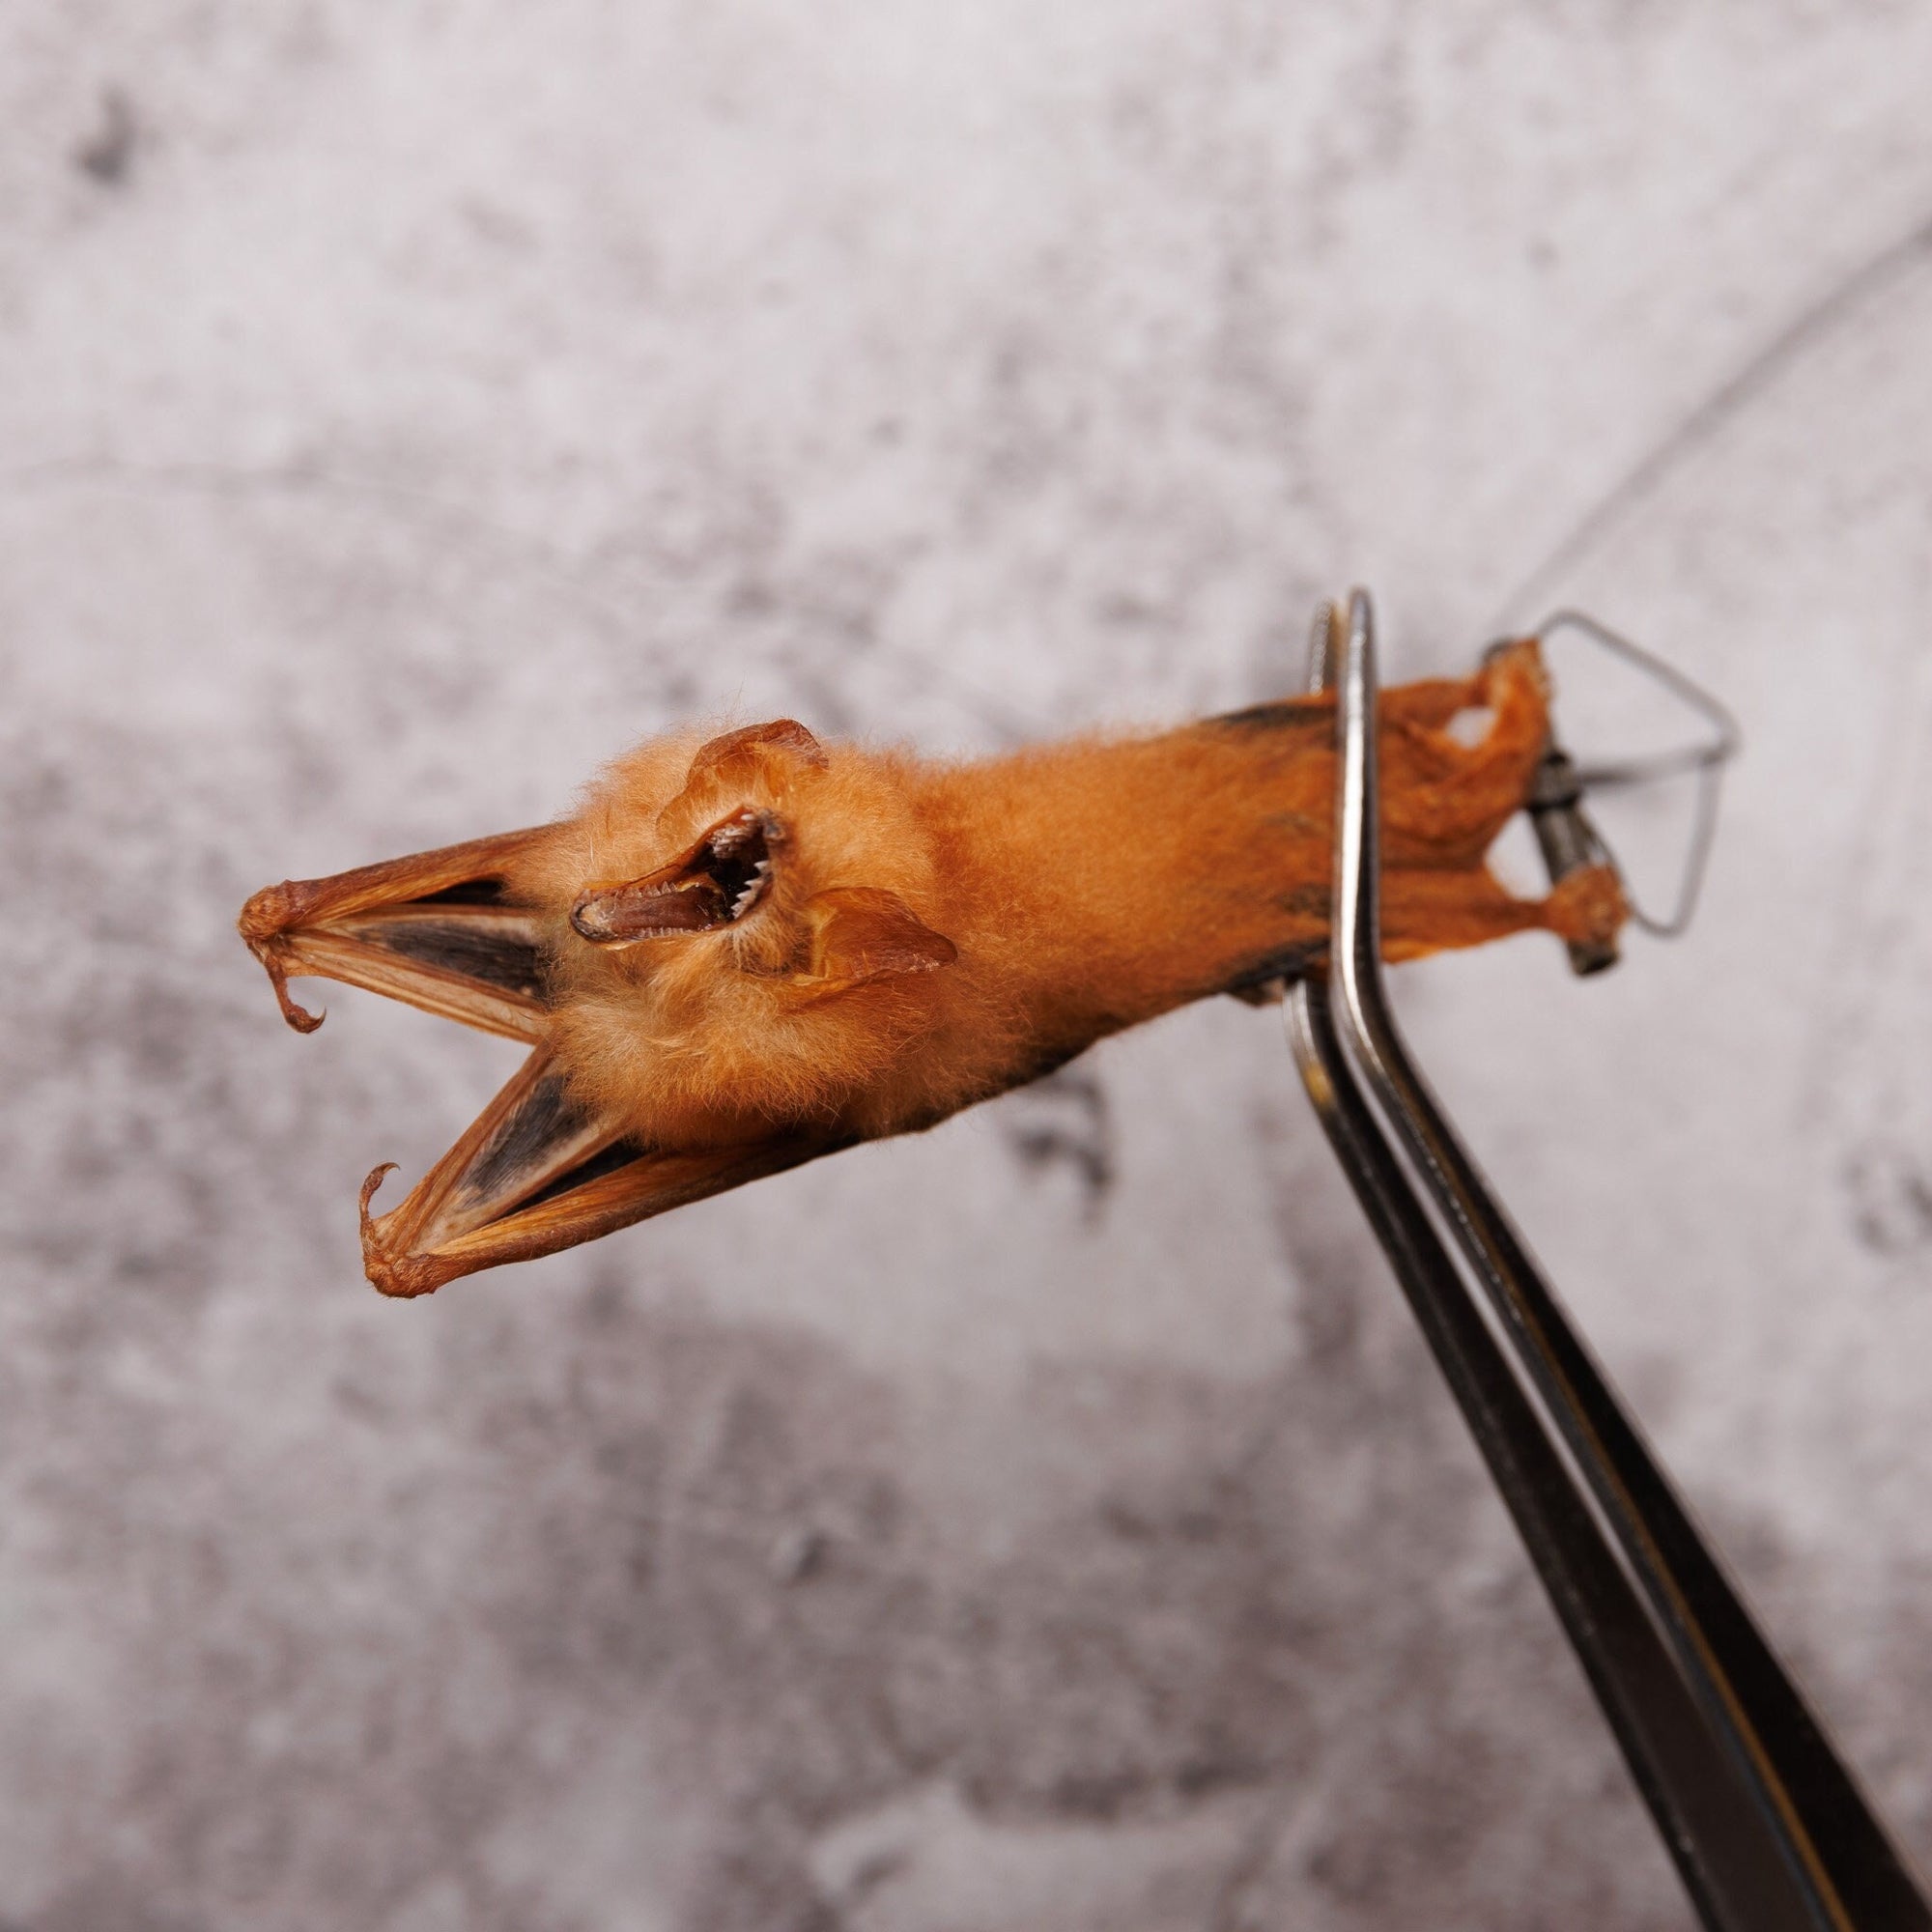 Fire Bat HANGING Mount (Kerivoula picta) | 3.5 Inch Dry-Preserved Taxidermy (Non-CITES)